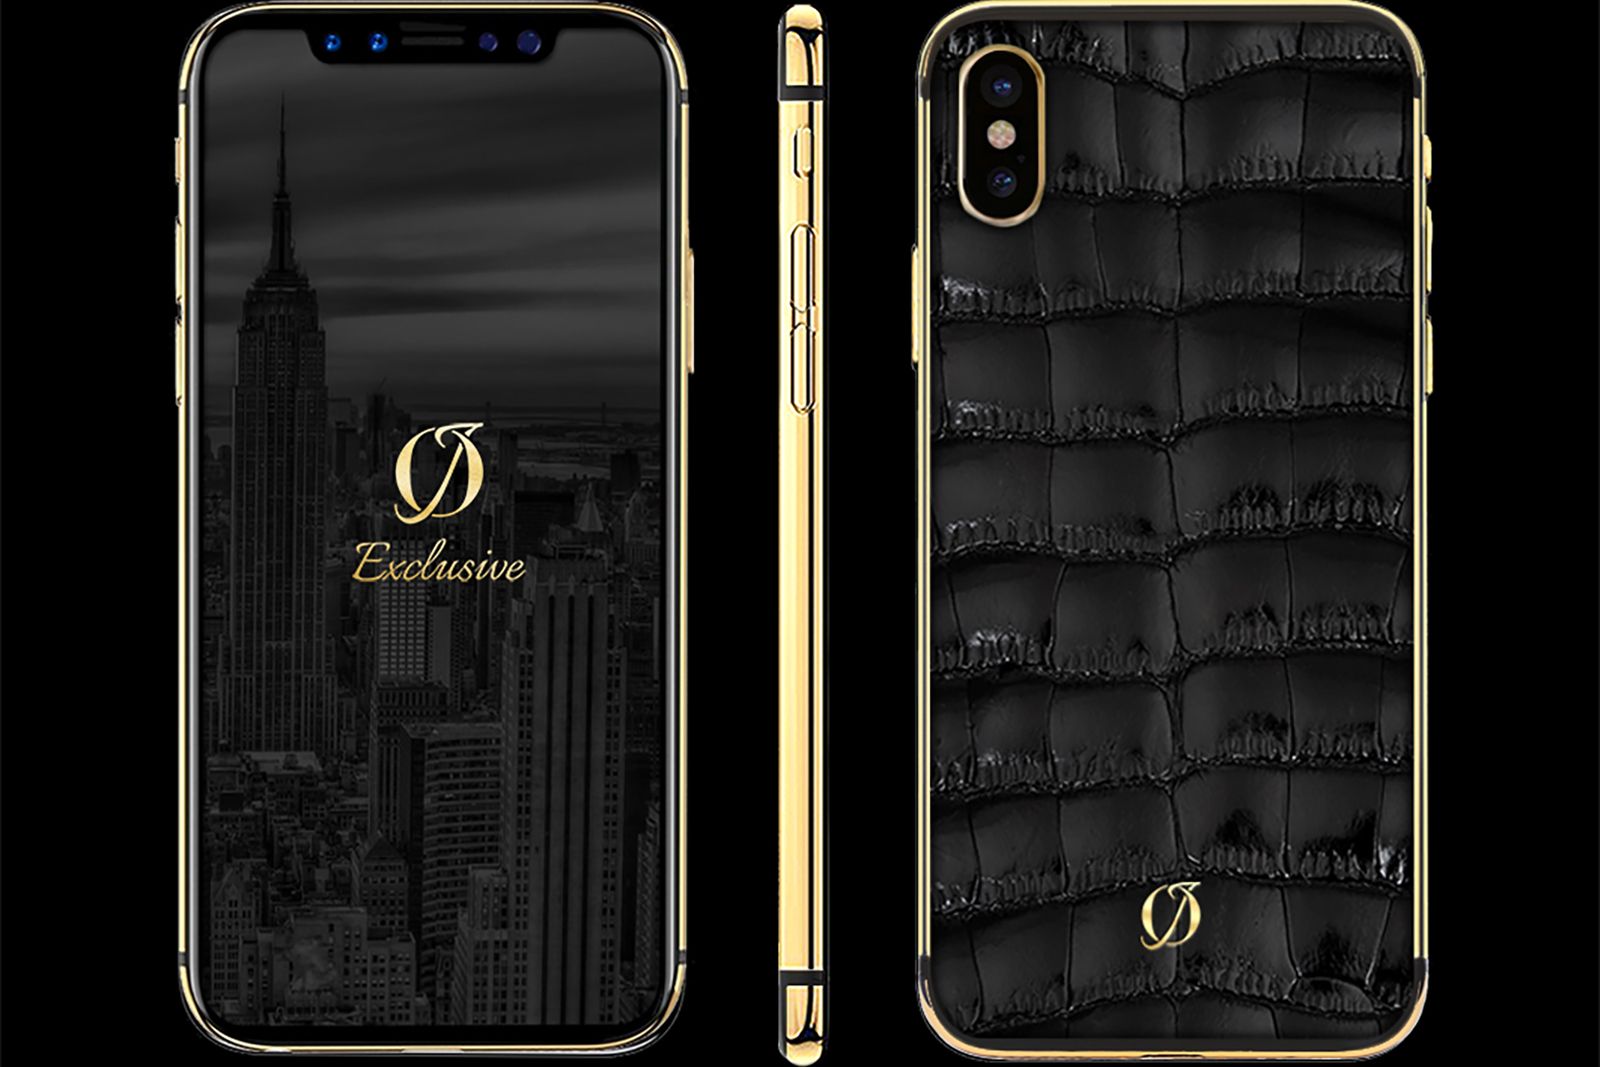 9 Luxury Iphone X Models That Are So Customised You Likely Cant Afford Them image 6